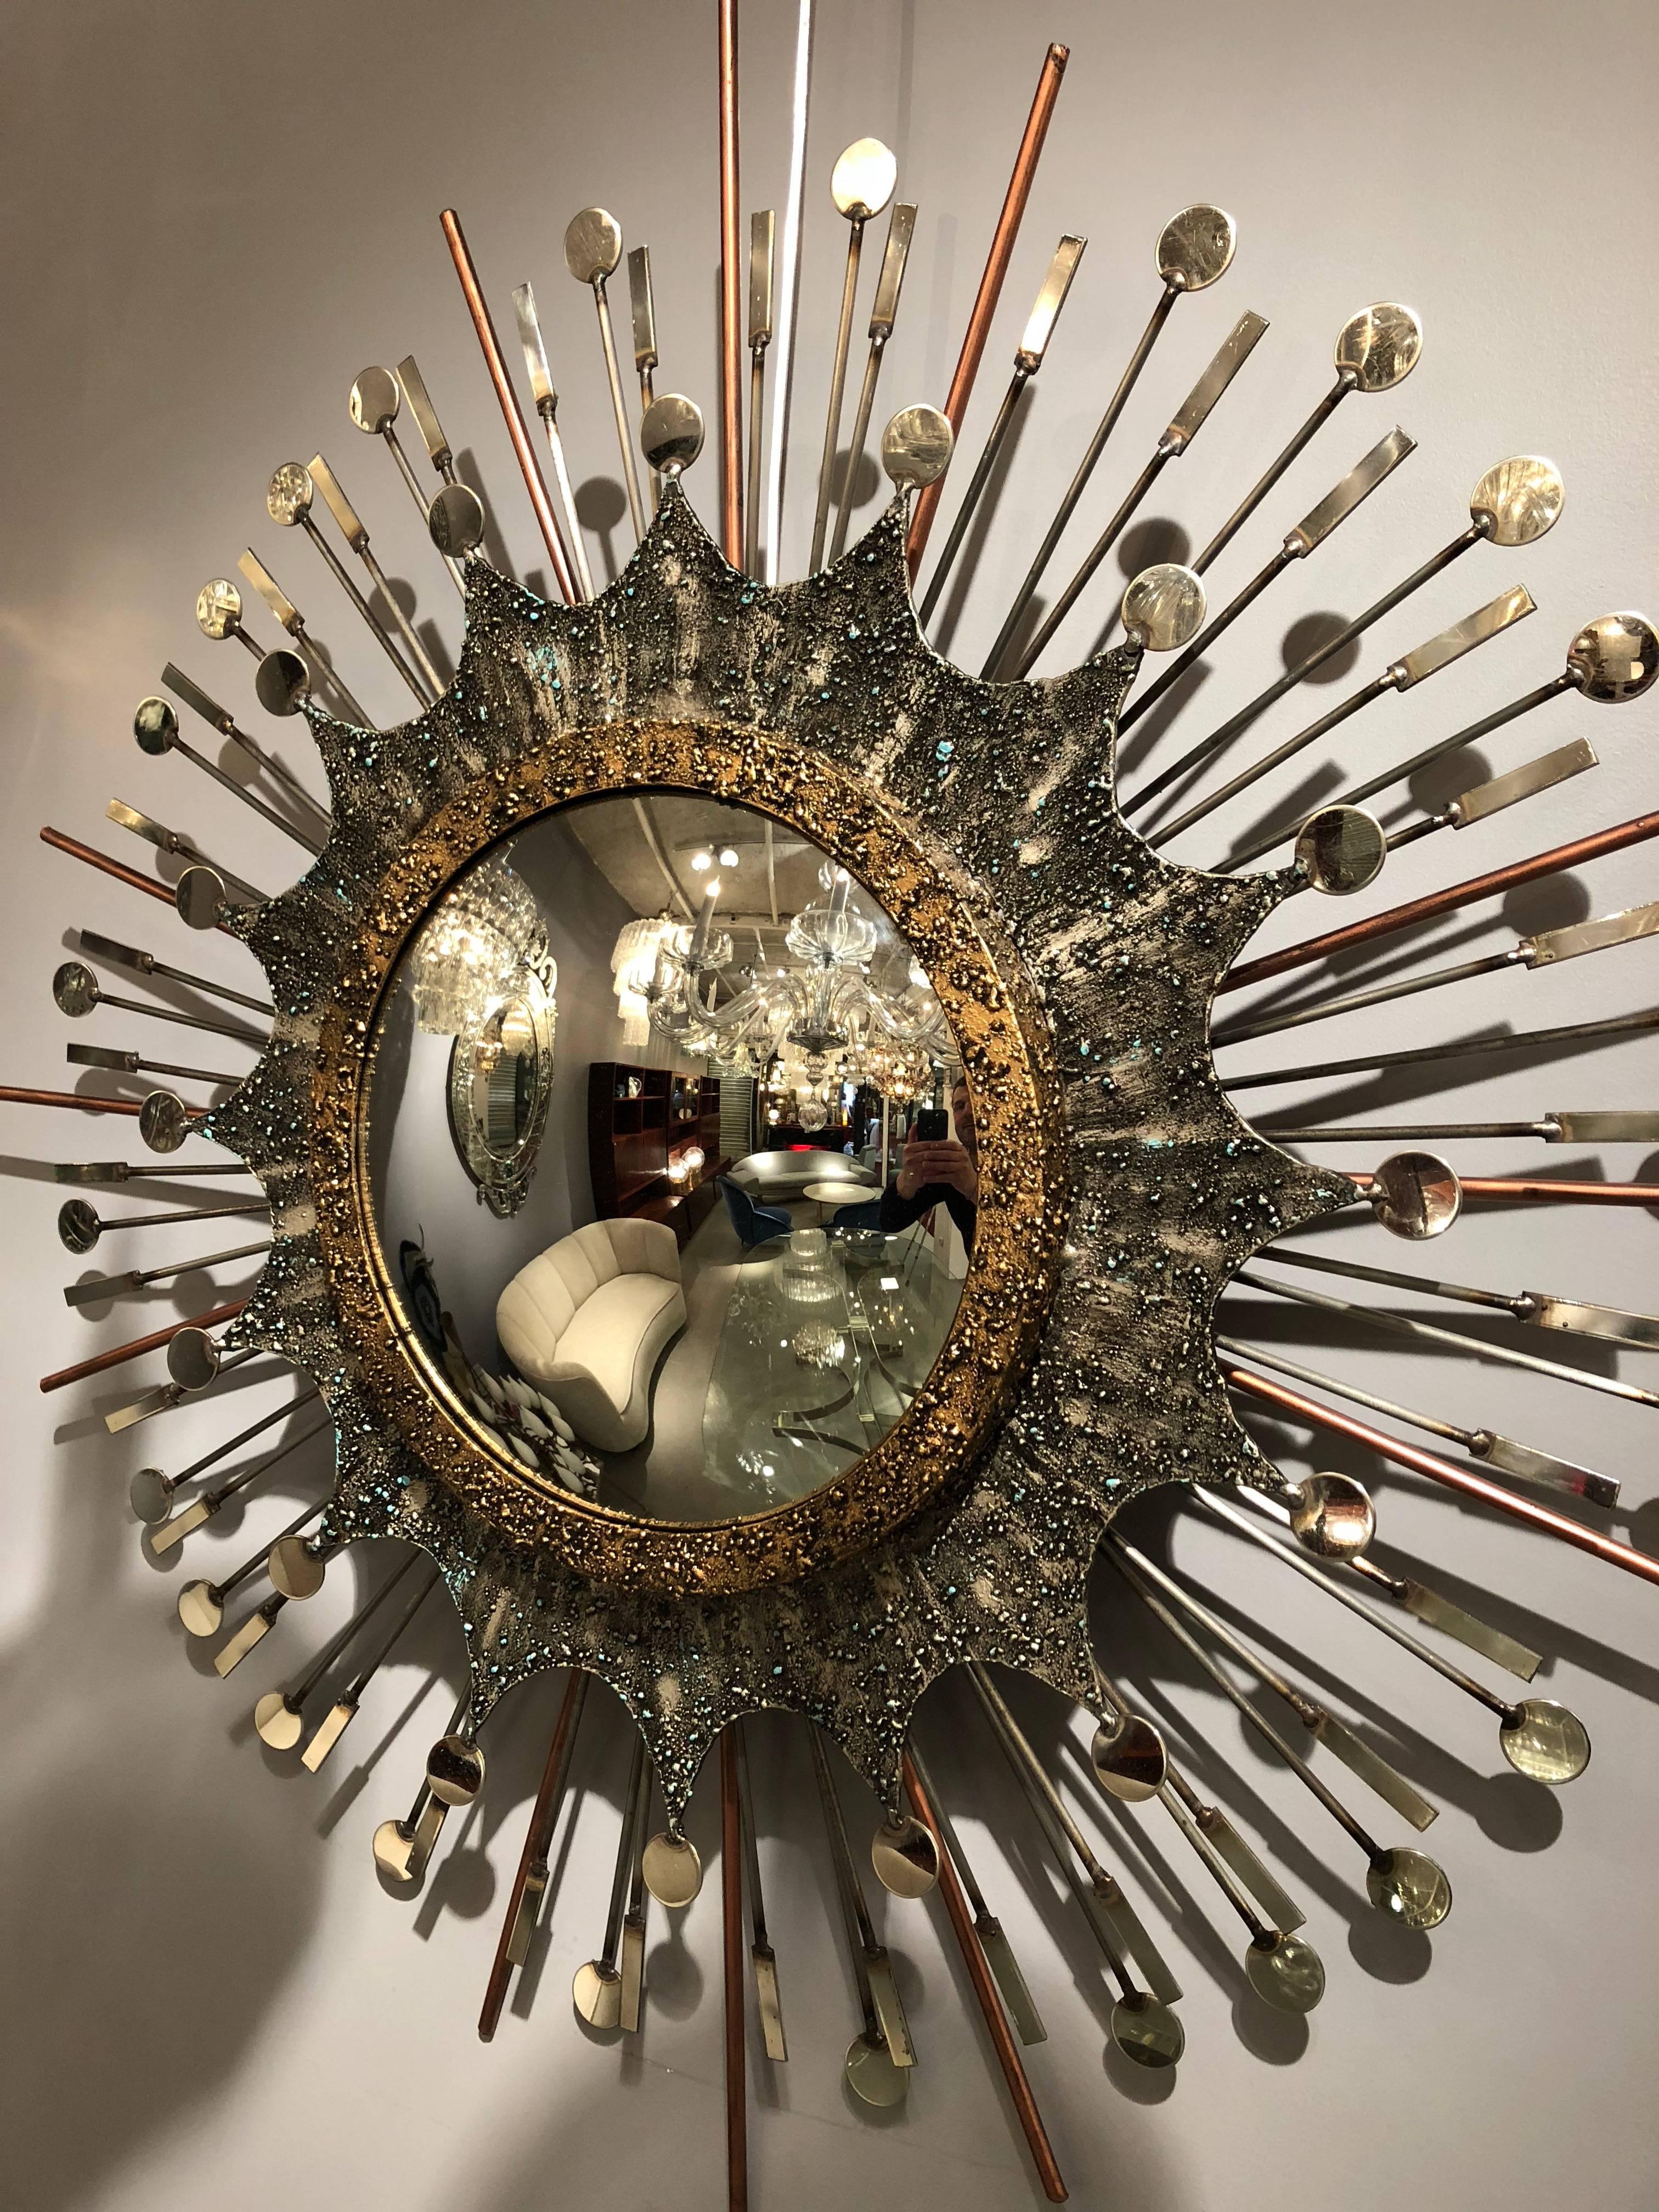 Stunning effect for this unique mirror handmade in France by Liger in exclusivity for Thomas Bonzom gallery. Patinated iron, stainless steel and copper are used in the composition. Signed, 1/1 comes with a certificate.